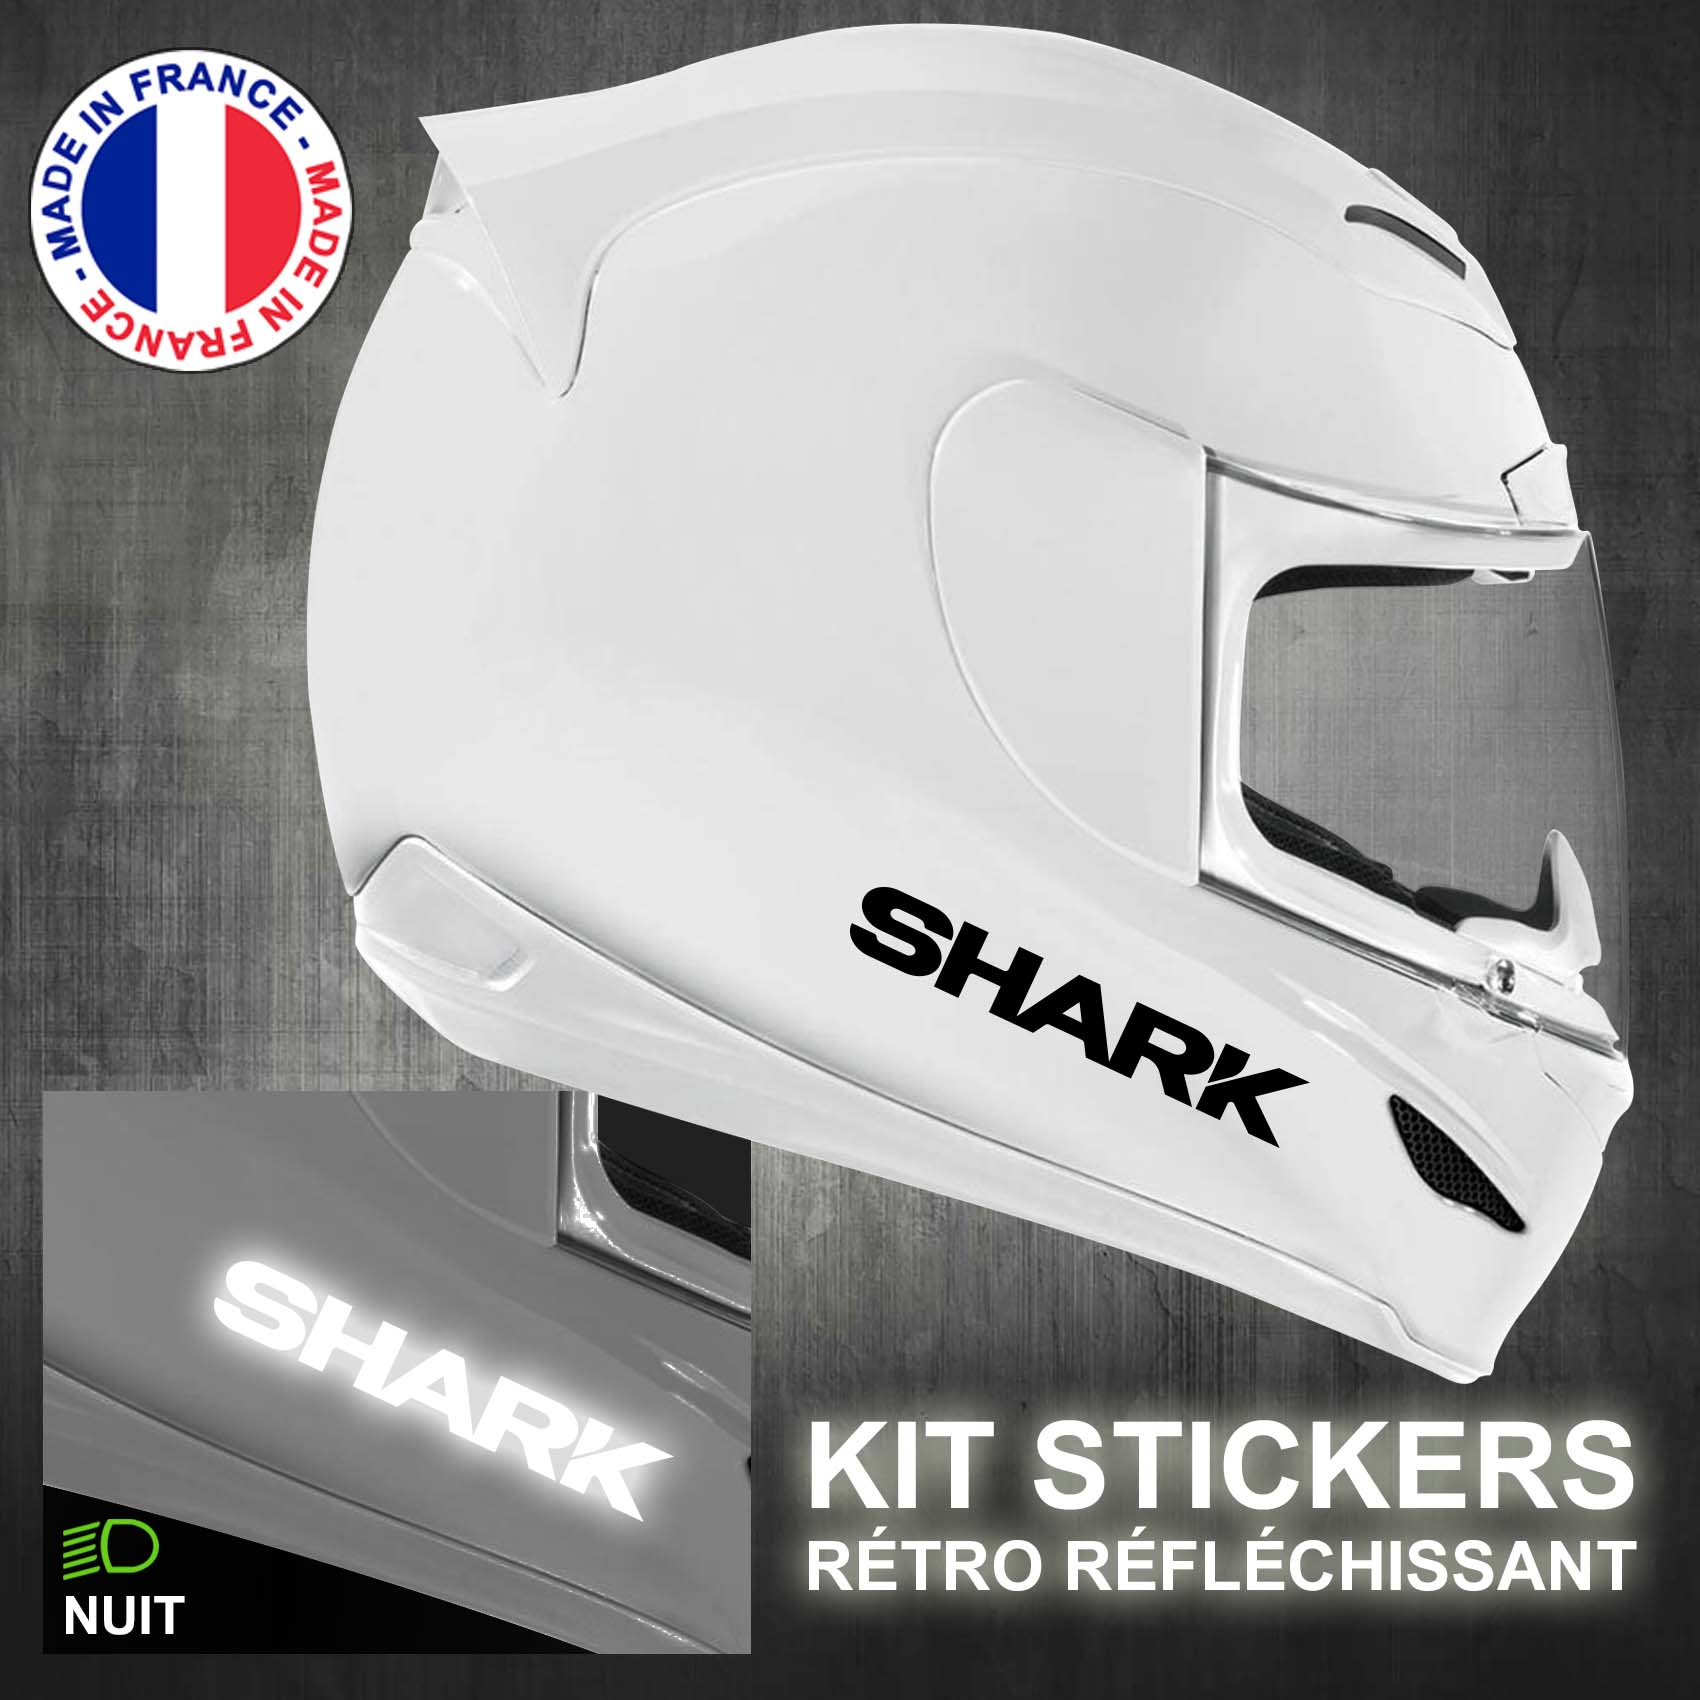 stickers-casque-moto-shark-ref1-retro-reflechissant-autocollant-blanc-moto-velo-tuning-racing-route-sticker-casques-adhesif-scooter-nuit-securite-decals-personnalise-personnalisable-min